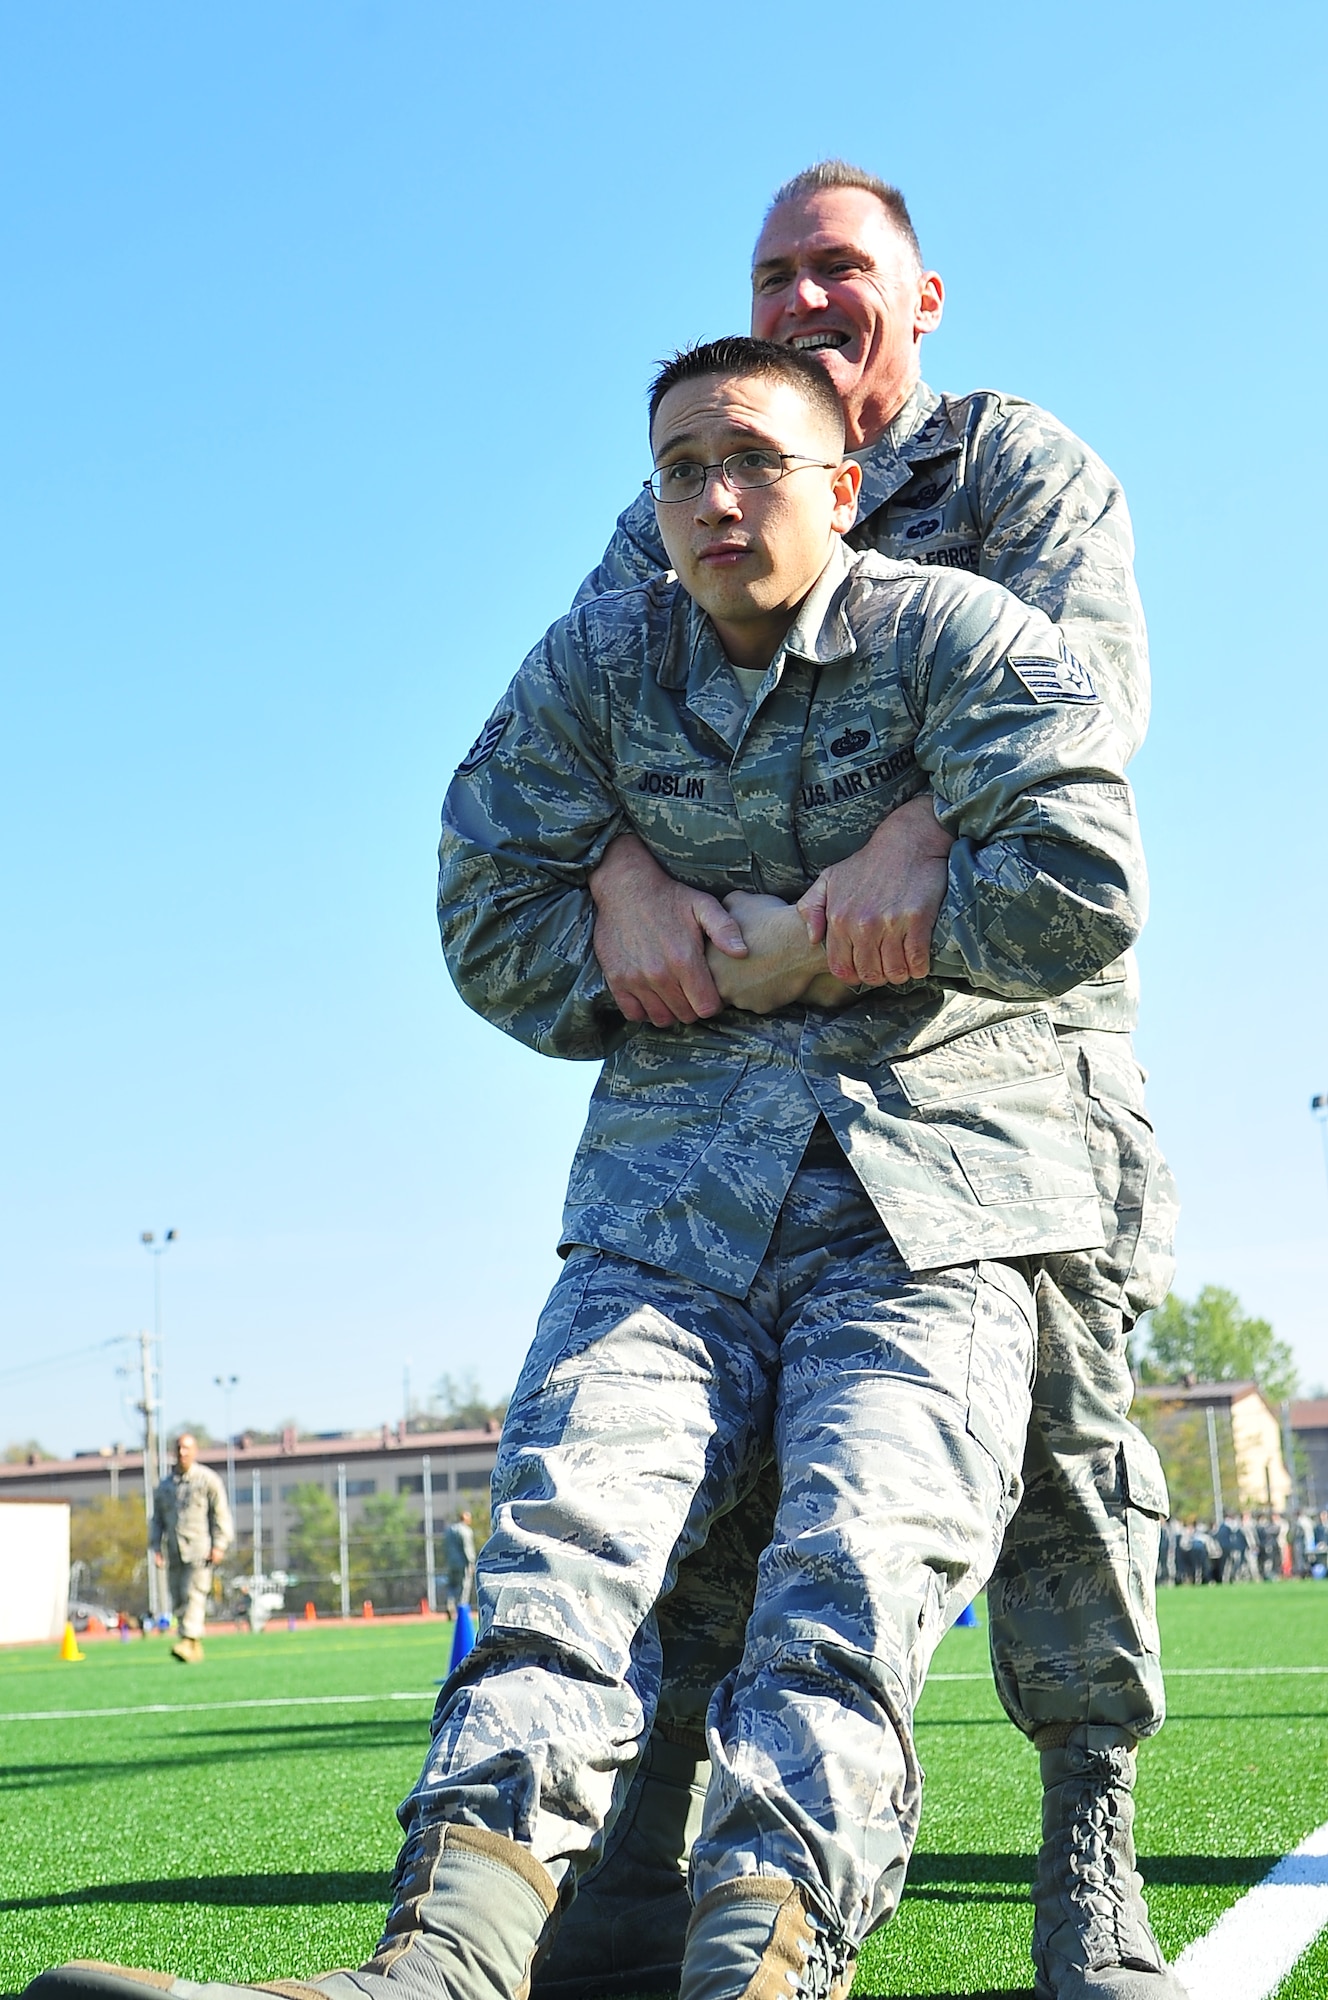 Maj. Gen. Kurt Neubauer, 7th Air Force vice commander, buddy drags Staff Sgt. Ryan Joslin, 7th Air Force command chief executive assistant, during the Combat Fitness Challenge, Oct. 26, 2012. Approximately 86 Airmen took the test consisting of a half a mile sprint in full uniform, a 30-pound ammo can lift, and maneuver under fire events combining a shuttle run, grenade throw, buddy carry, fireman’s carry, ammunition drag, sprints and low and high crawls. (U.S. Air Force photo/Tech. Sgt. Raymond Mills)